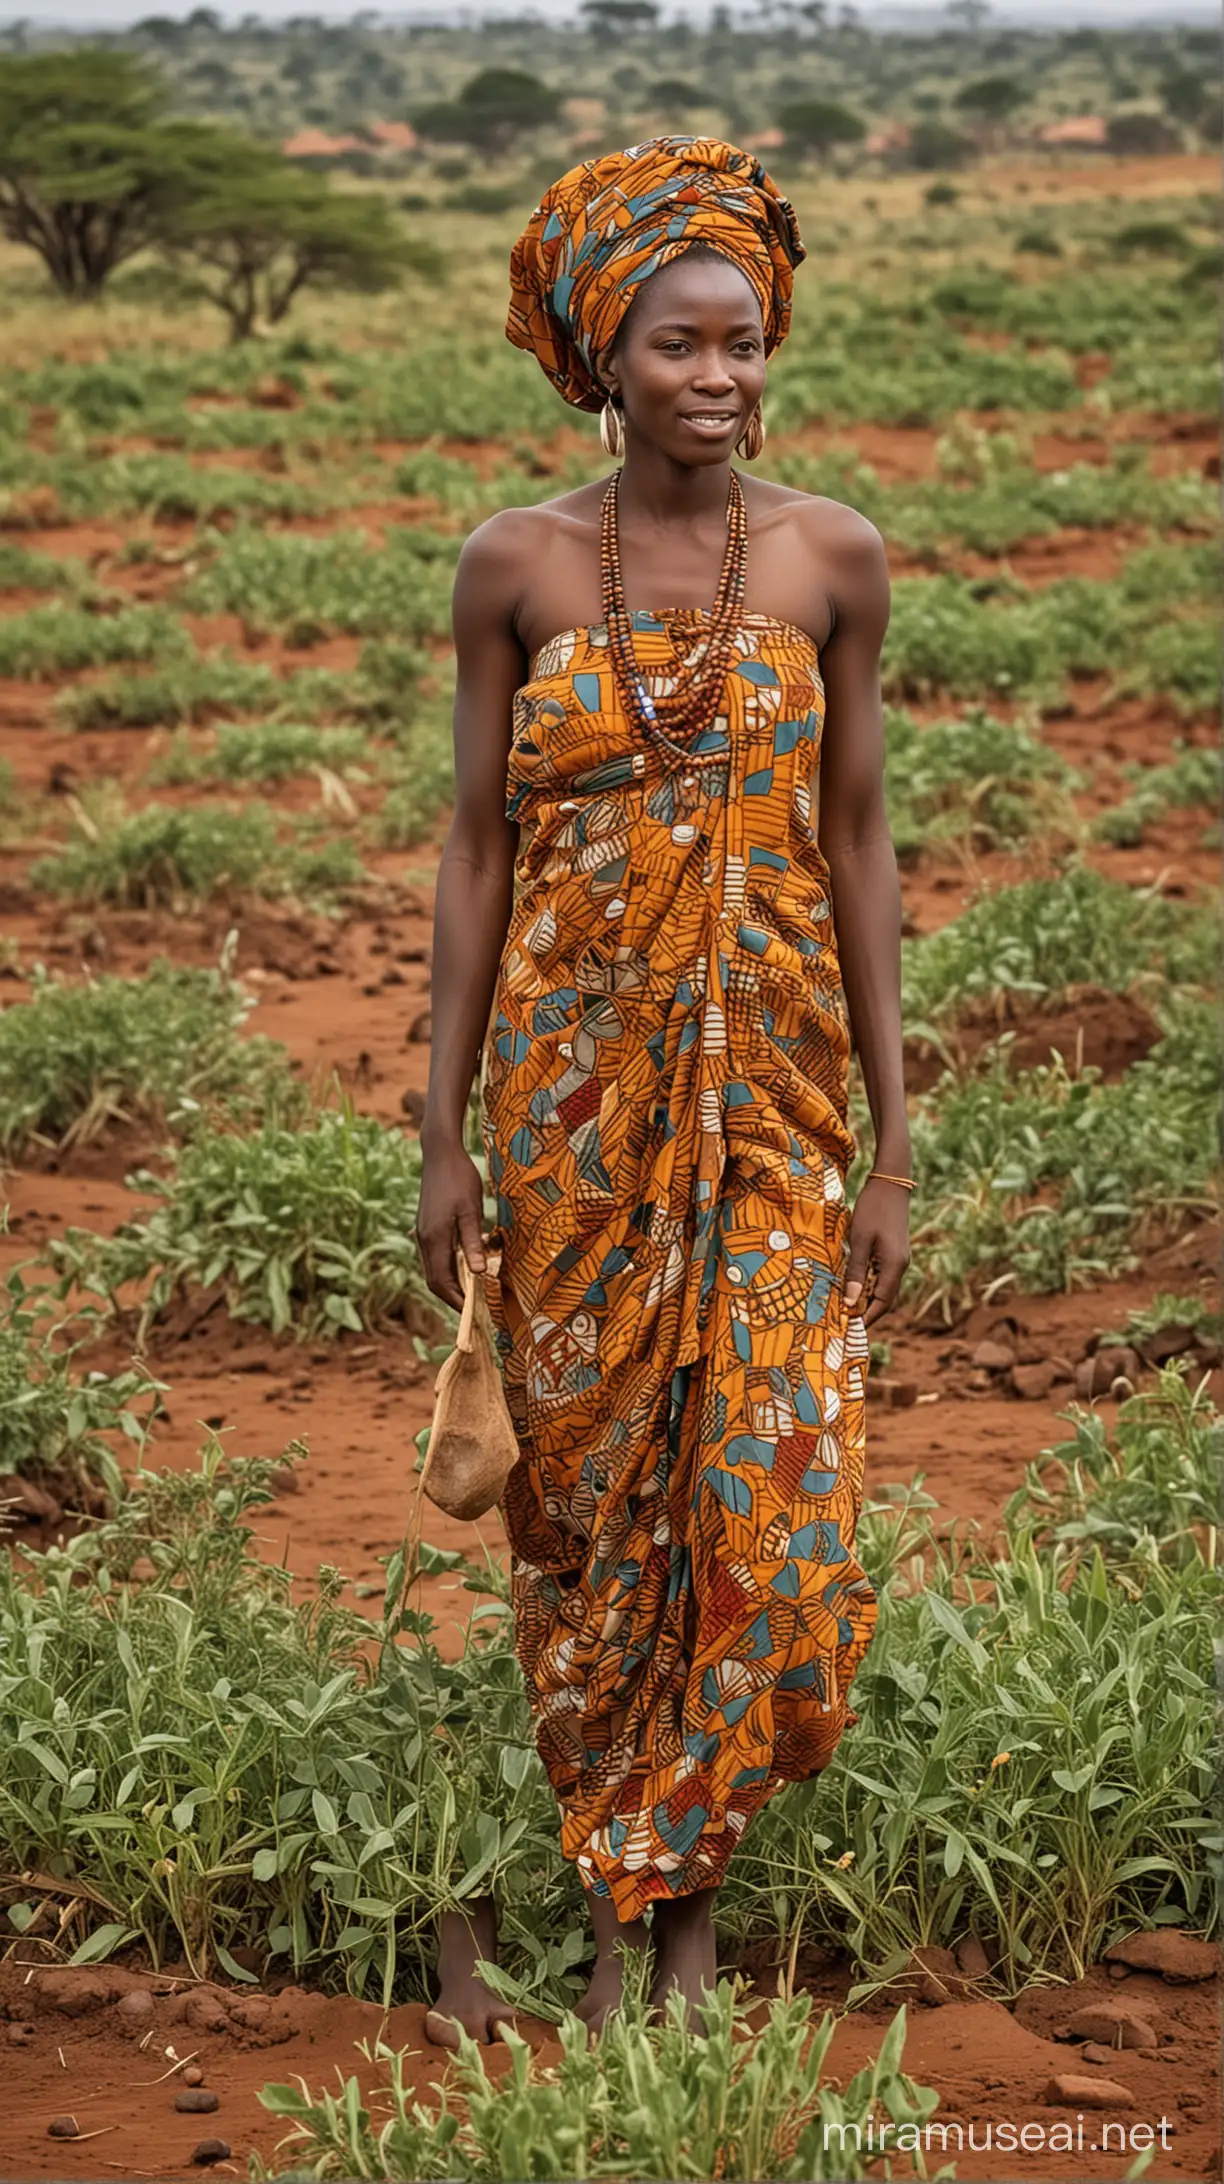 Generate an image showcasing the natural beauty and abundance of resources in Africa, highlighting the fertile lands and the hardworking people who nurture them.